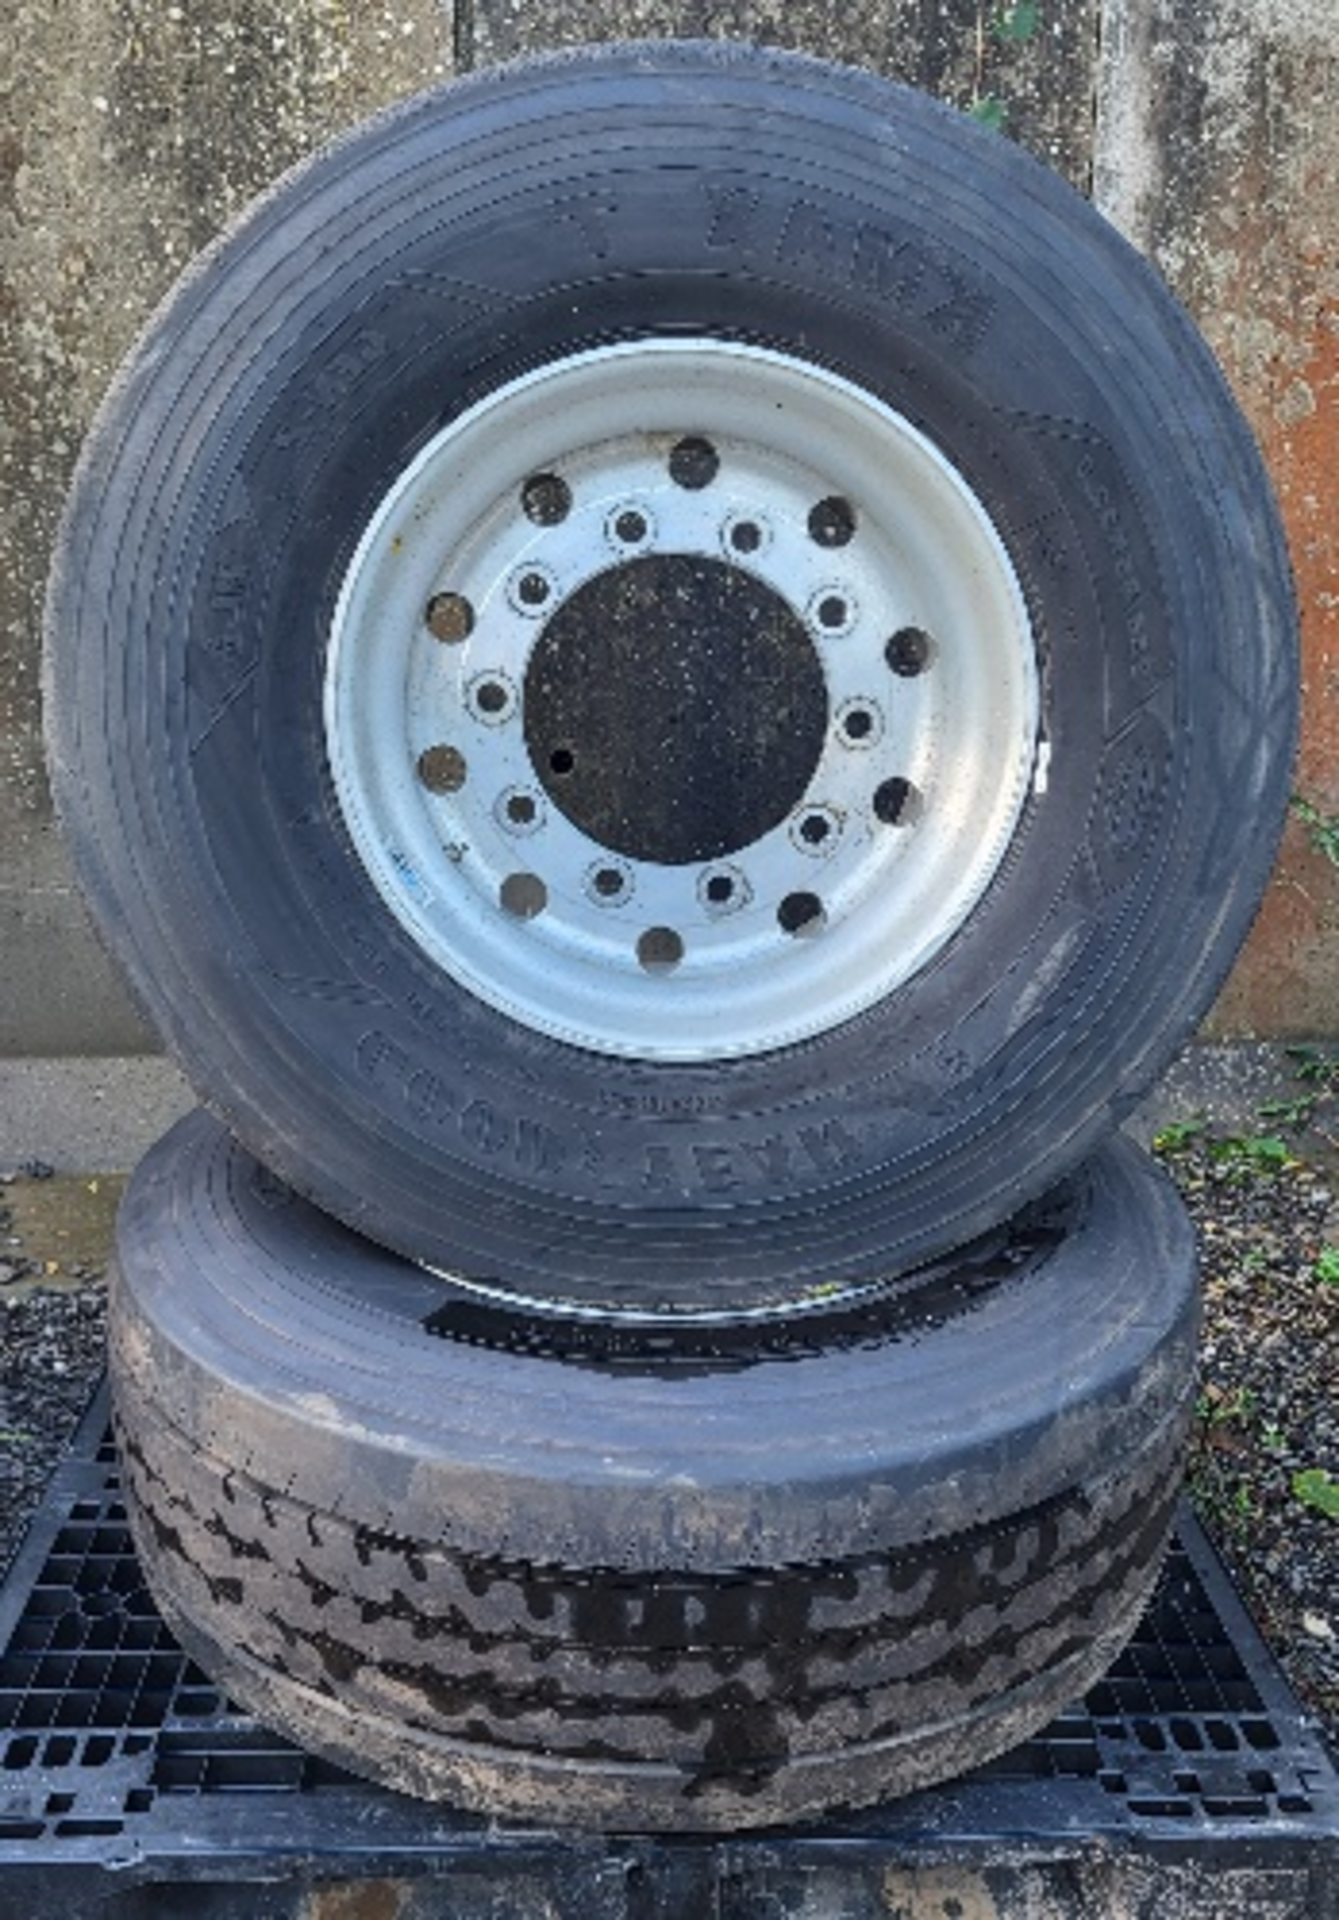 2 X XLITE SUPER SINGLE ALLOY TRAILER WHEELS FITTED WITH GOODYEAR 385-65 22.5 TYRES *PLUS VAT*